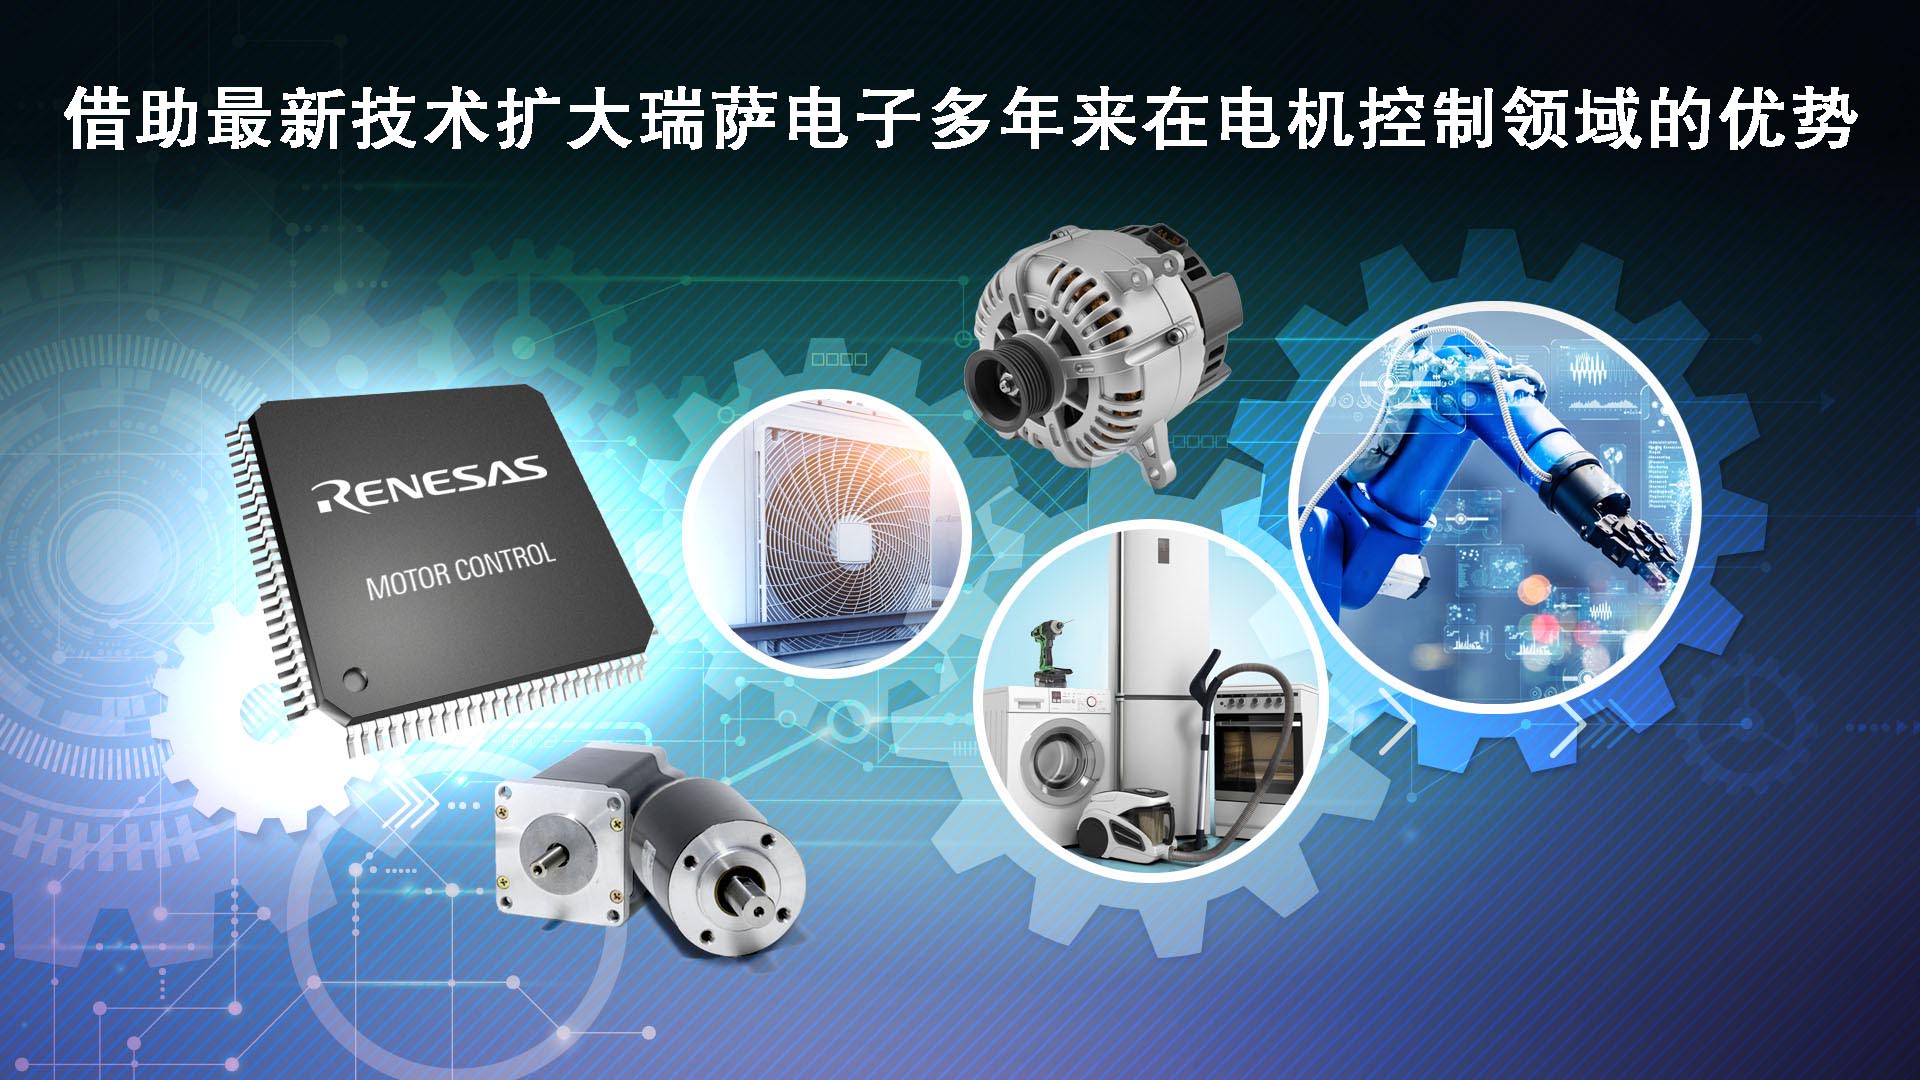 Renesas Electronics Expands Lineup of Motor Control Embedded Processing Products with Over 35 New MCU Products